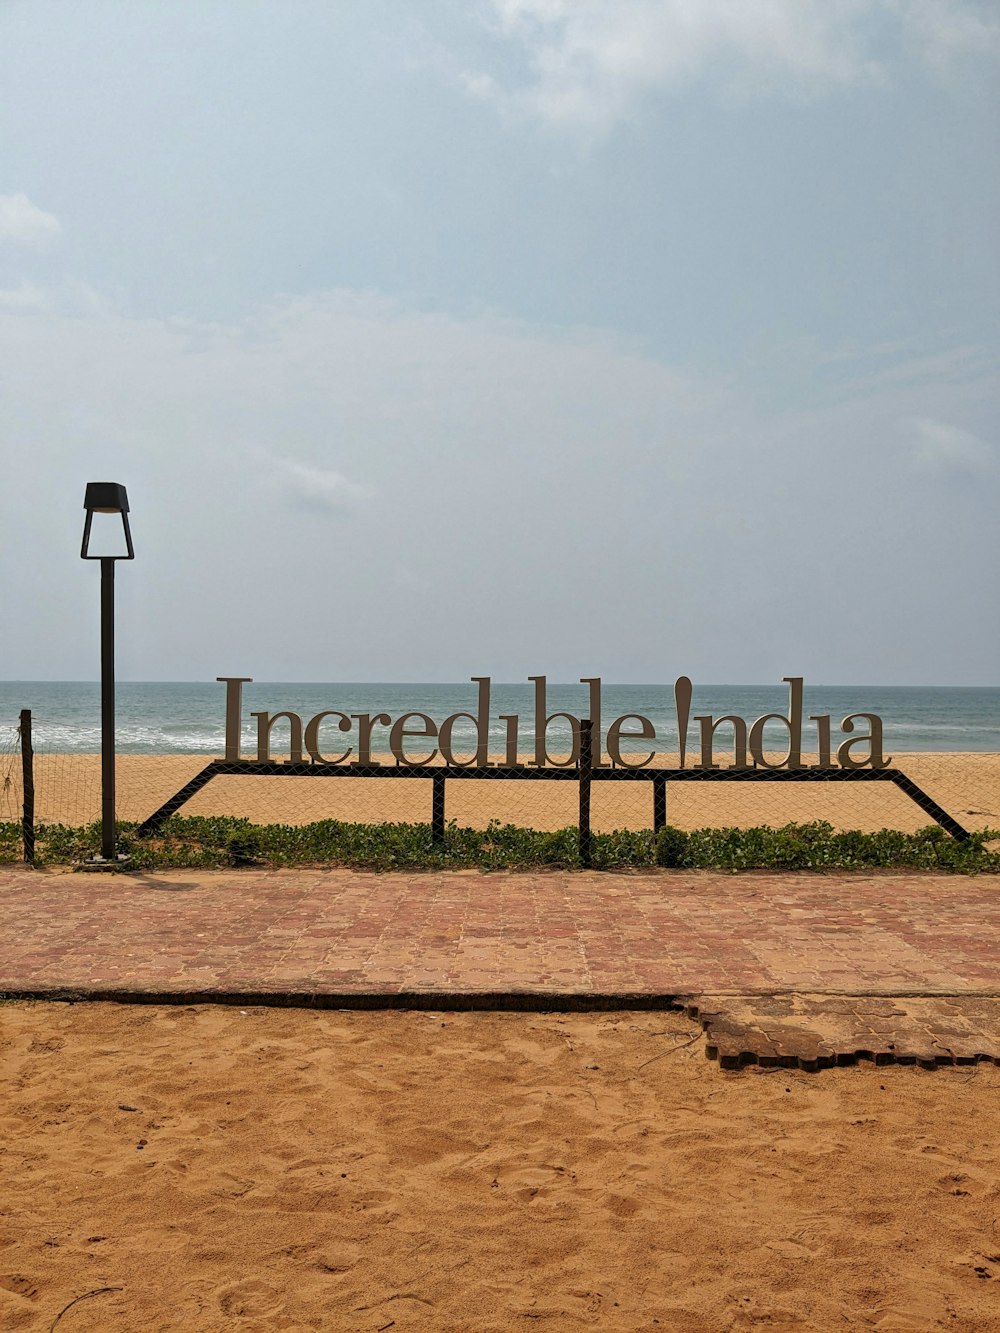 there is a sign that says incredible india